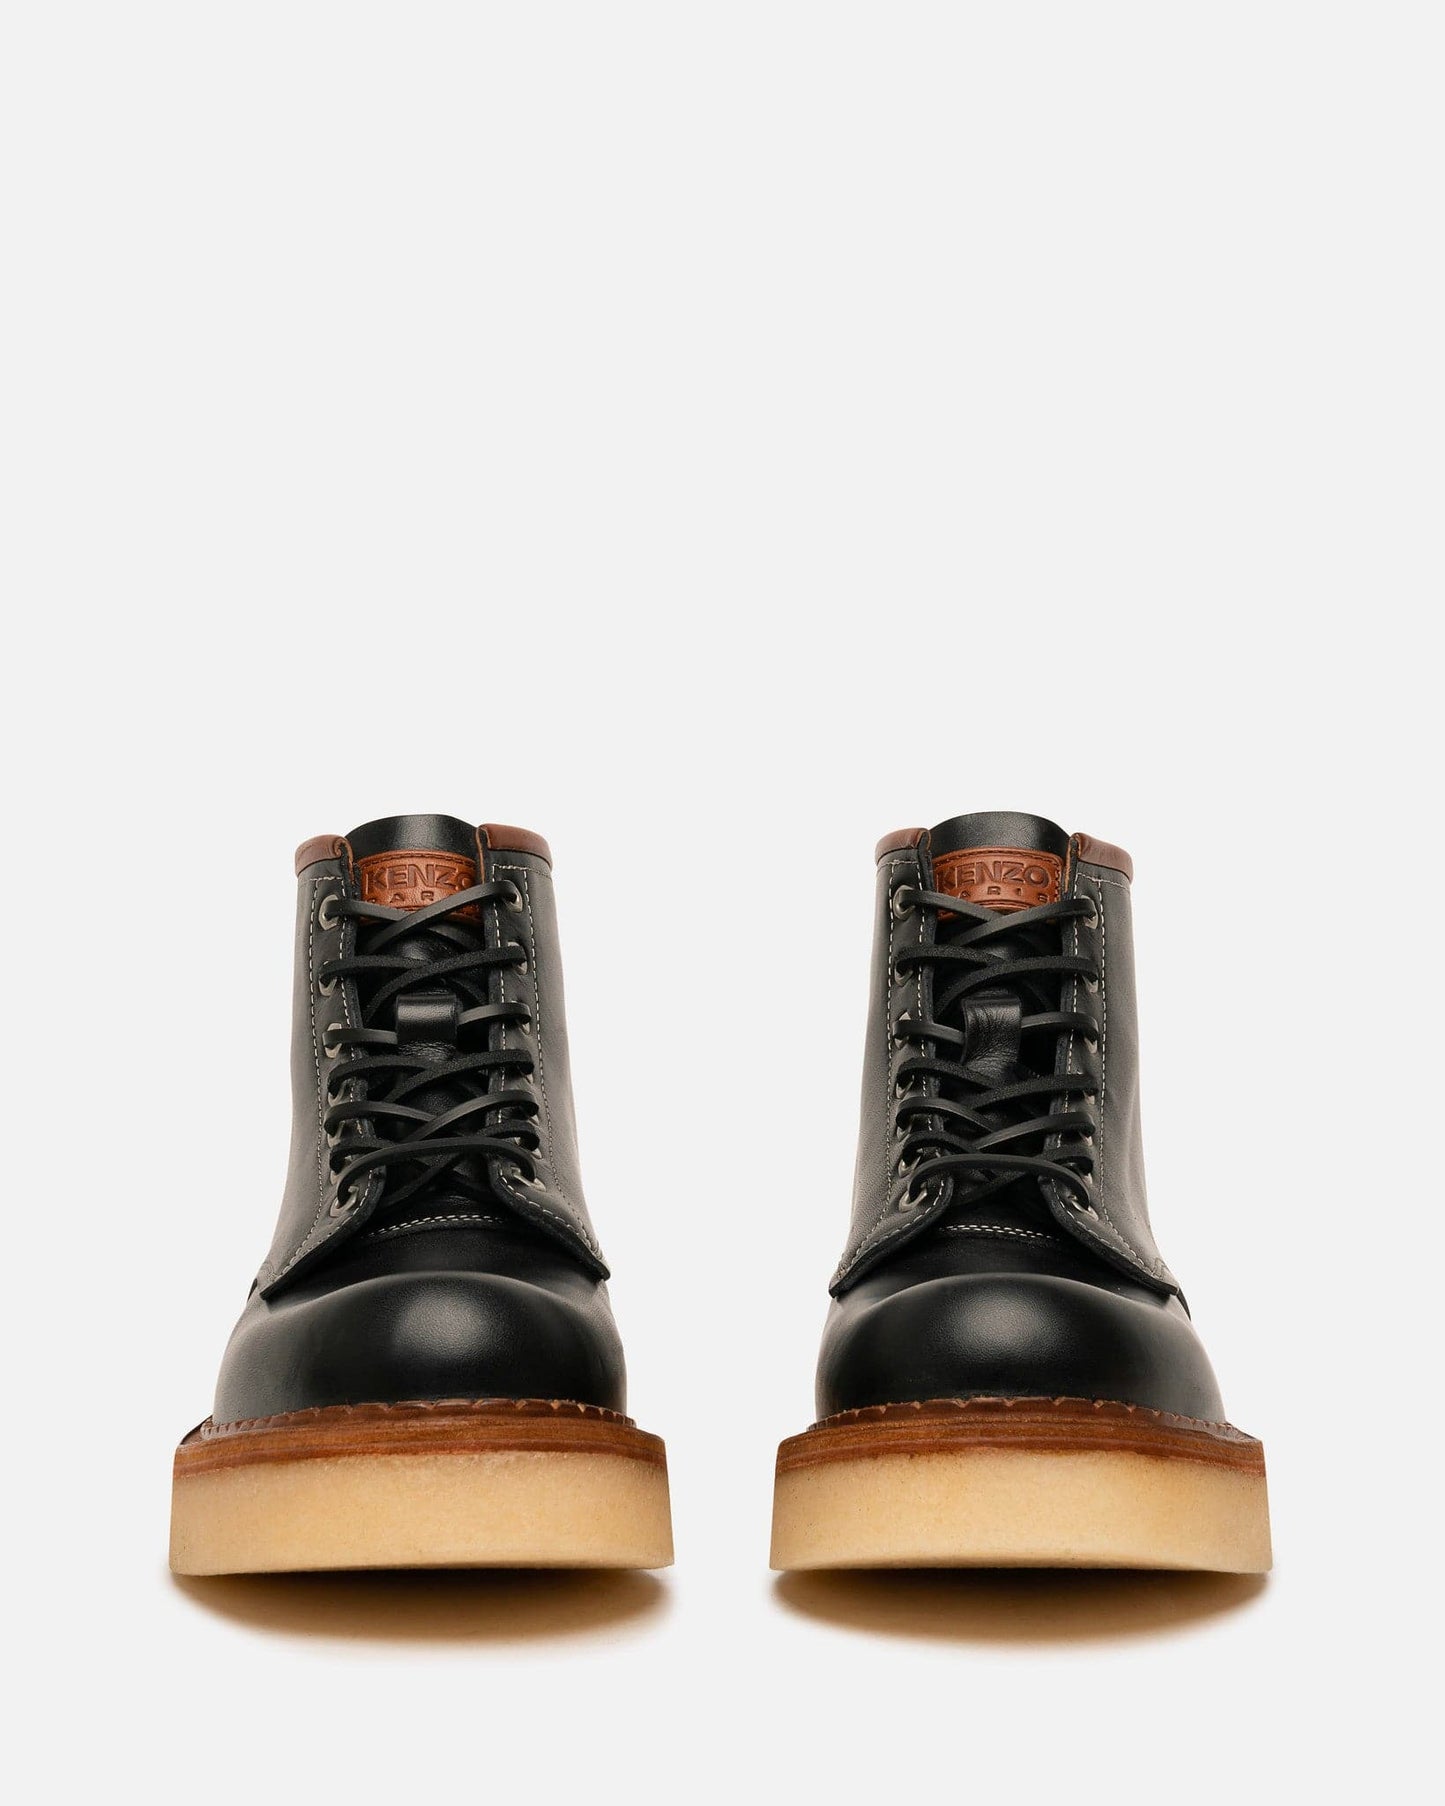 KENZO Men's Boots Kenzoyama Lace-Up Boots in Black